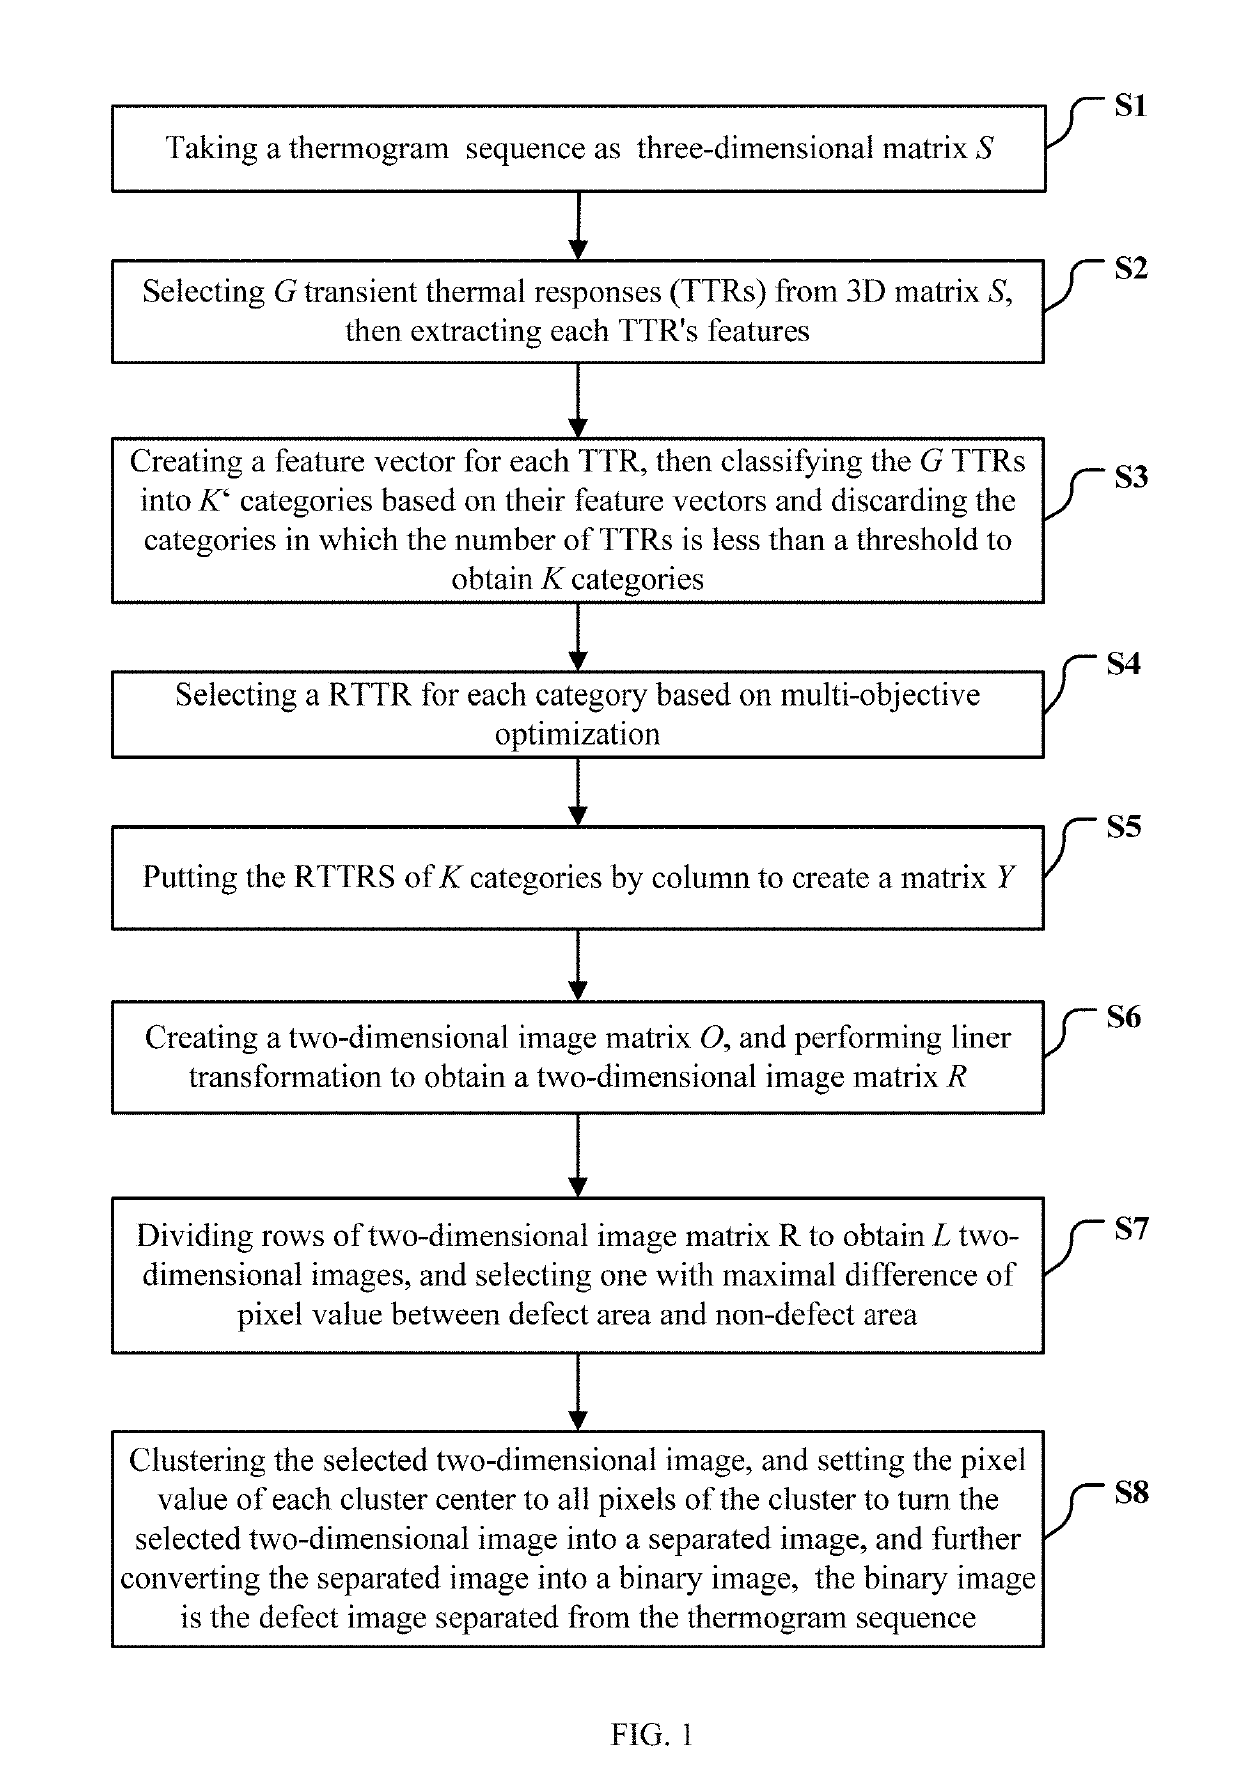 Method for separating out a defect image from a thermogram sequence based on weighted naive bayesian classifier and dynamic multi-objective optimization